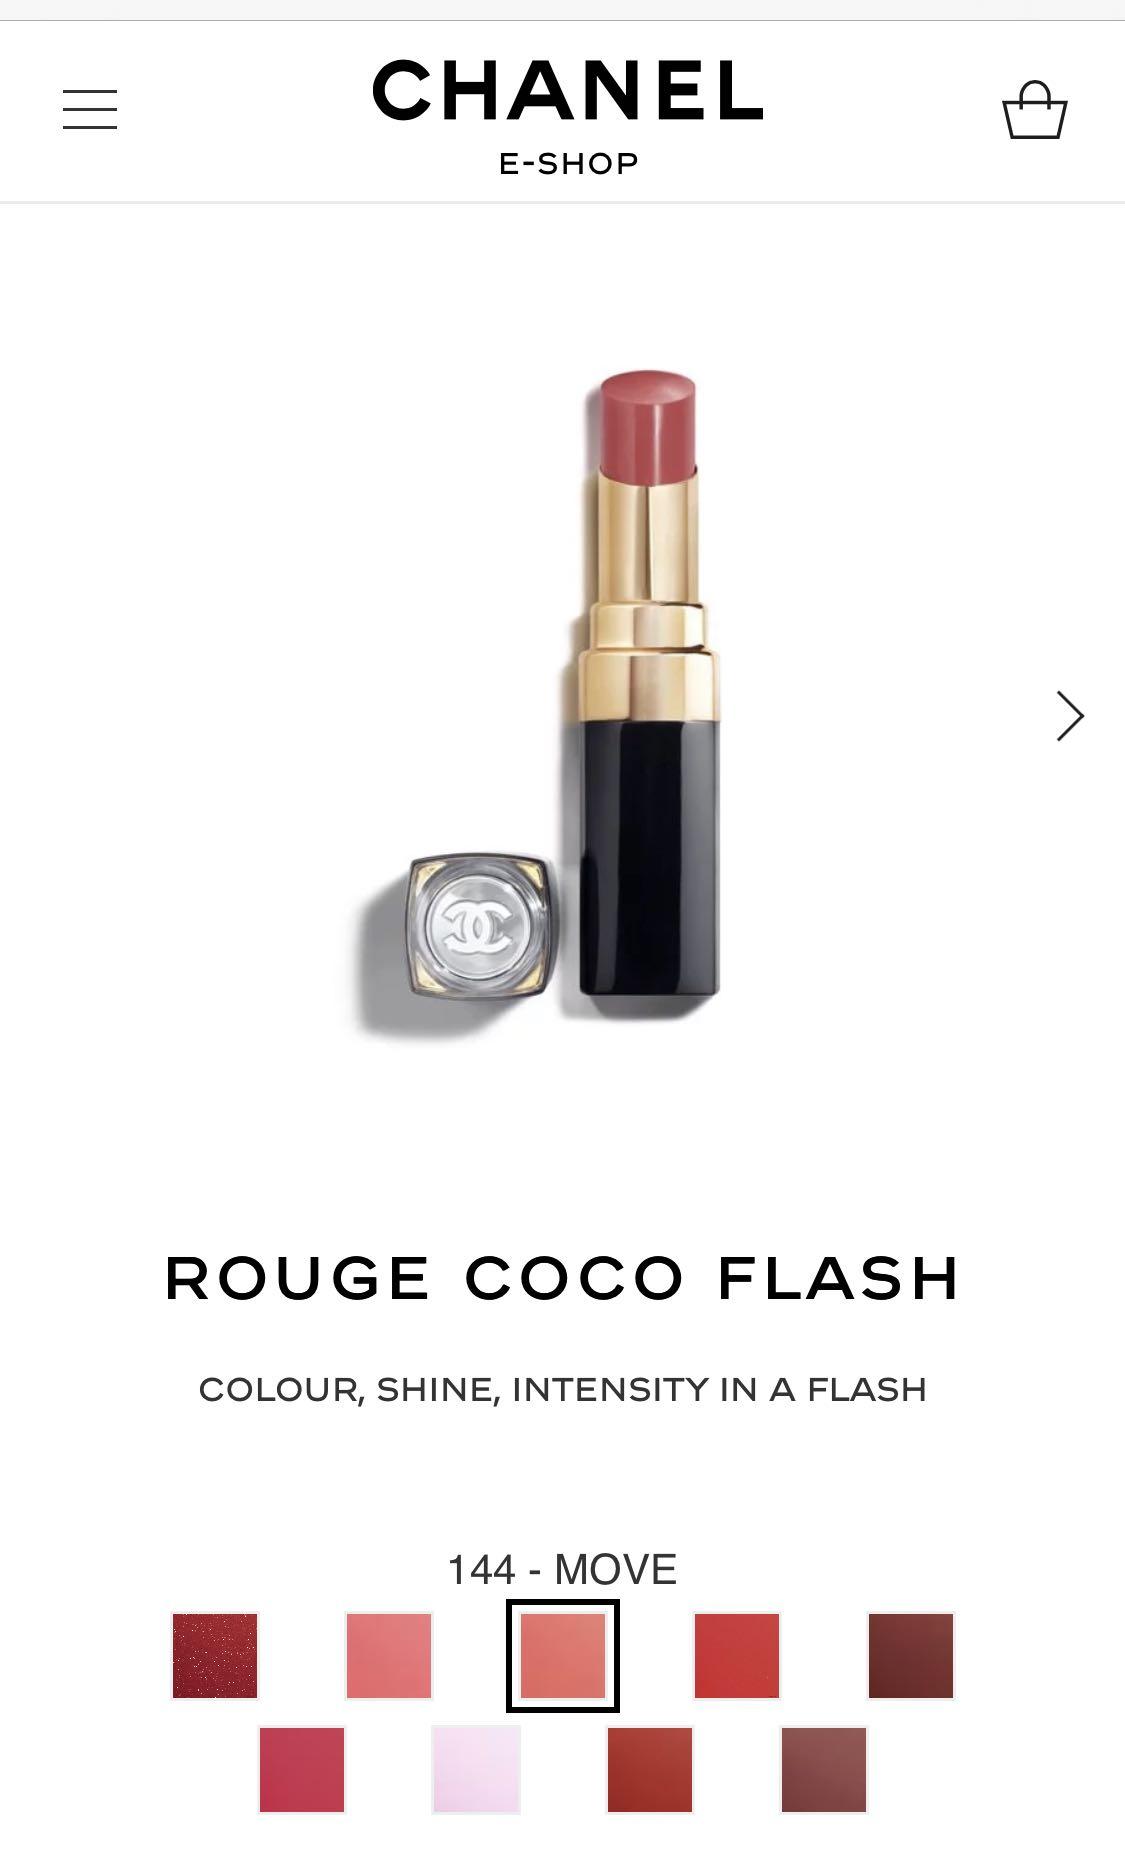 Chanel Rouge Coco Flash Lipstick in 144 Move, Beauty & Personal Care, Face,  Makeup on Carousell